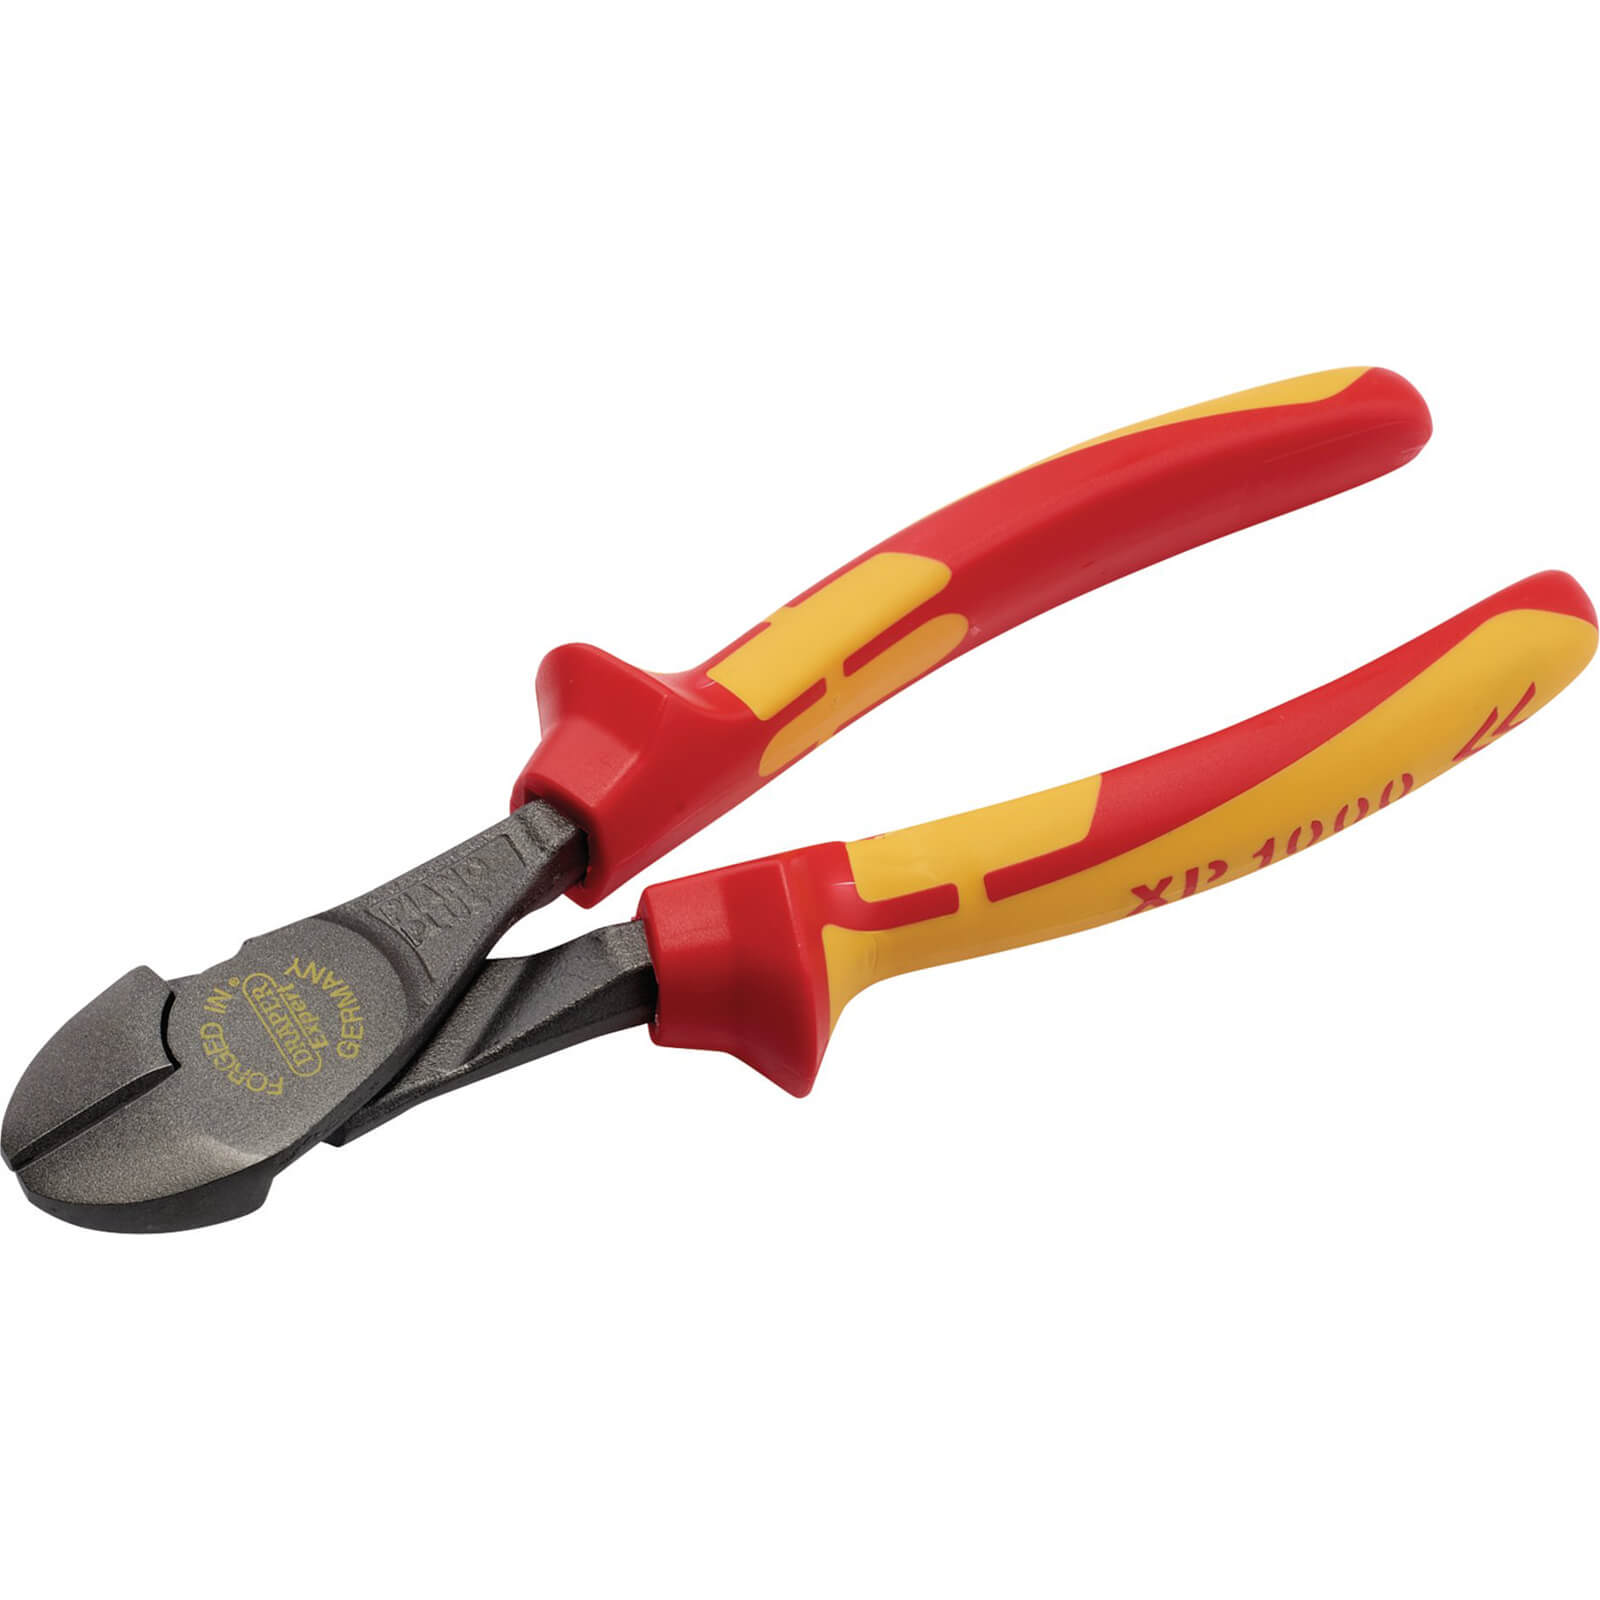 Photo of Draper Xp1000 Vde Insulated High Leverage Side Cutters 180mm